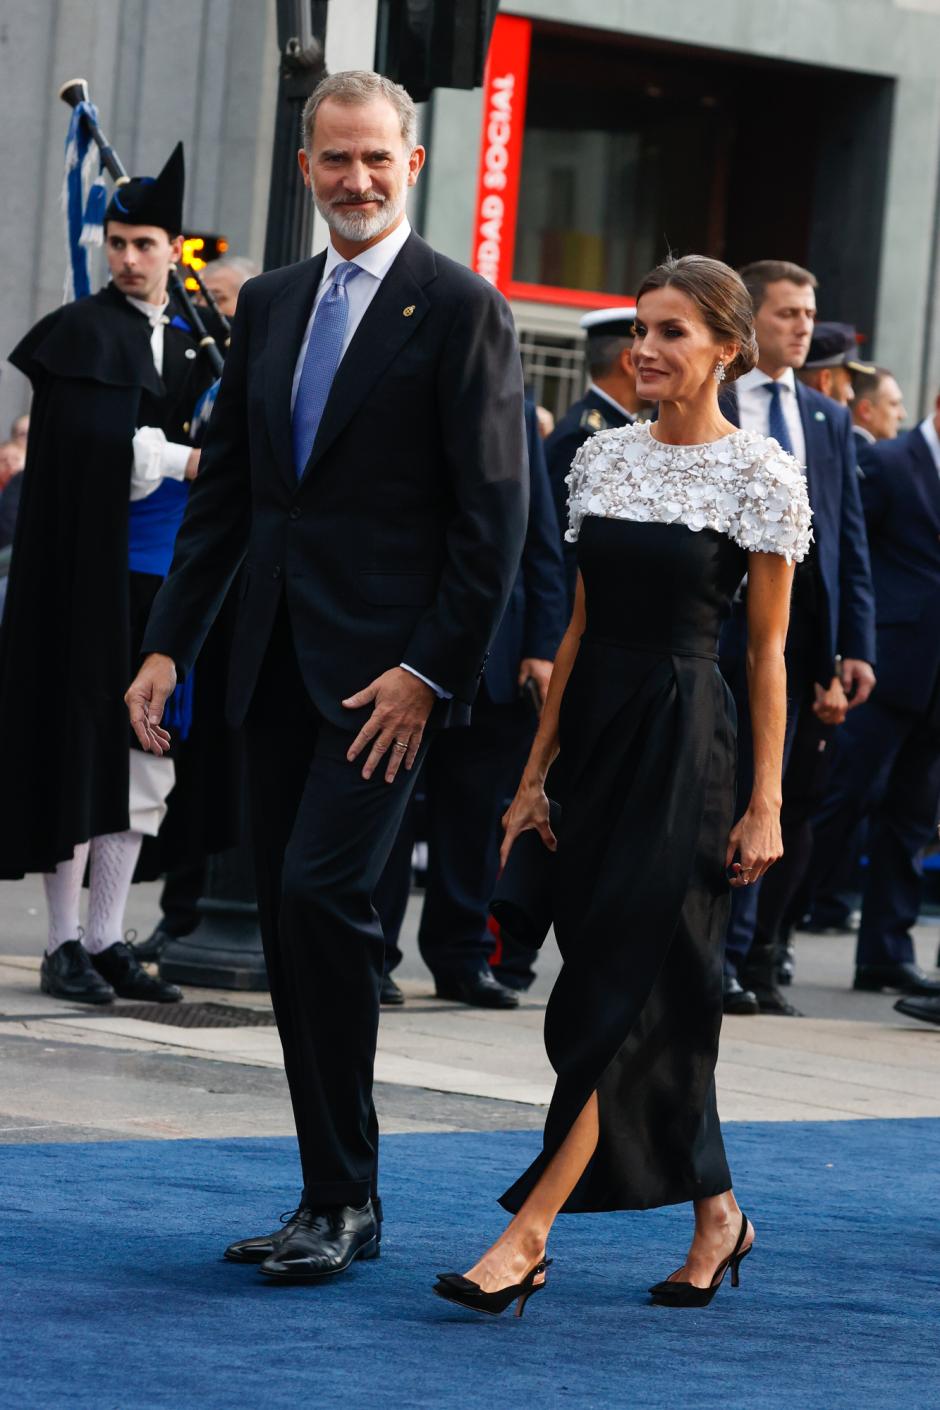 Spanish King Felipe VI and Queen Letizia during the Princess of Asturias Awards 2022 in Oviedo, on Friday 29 October 2022.